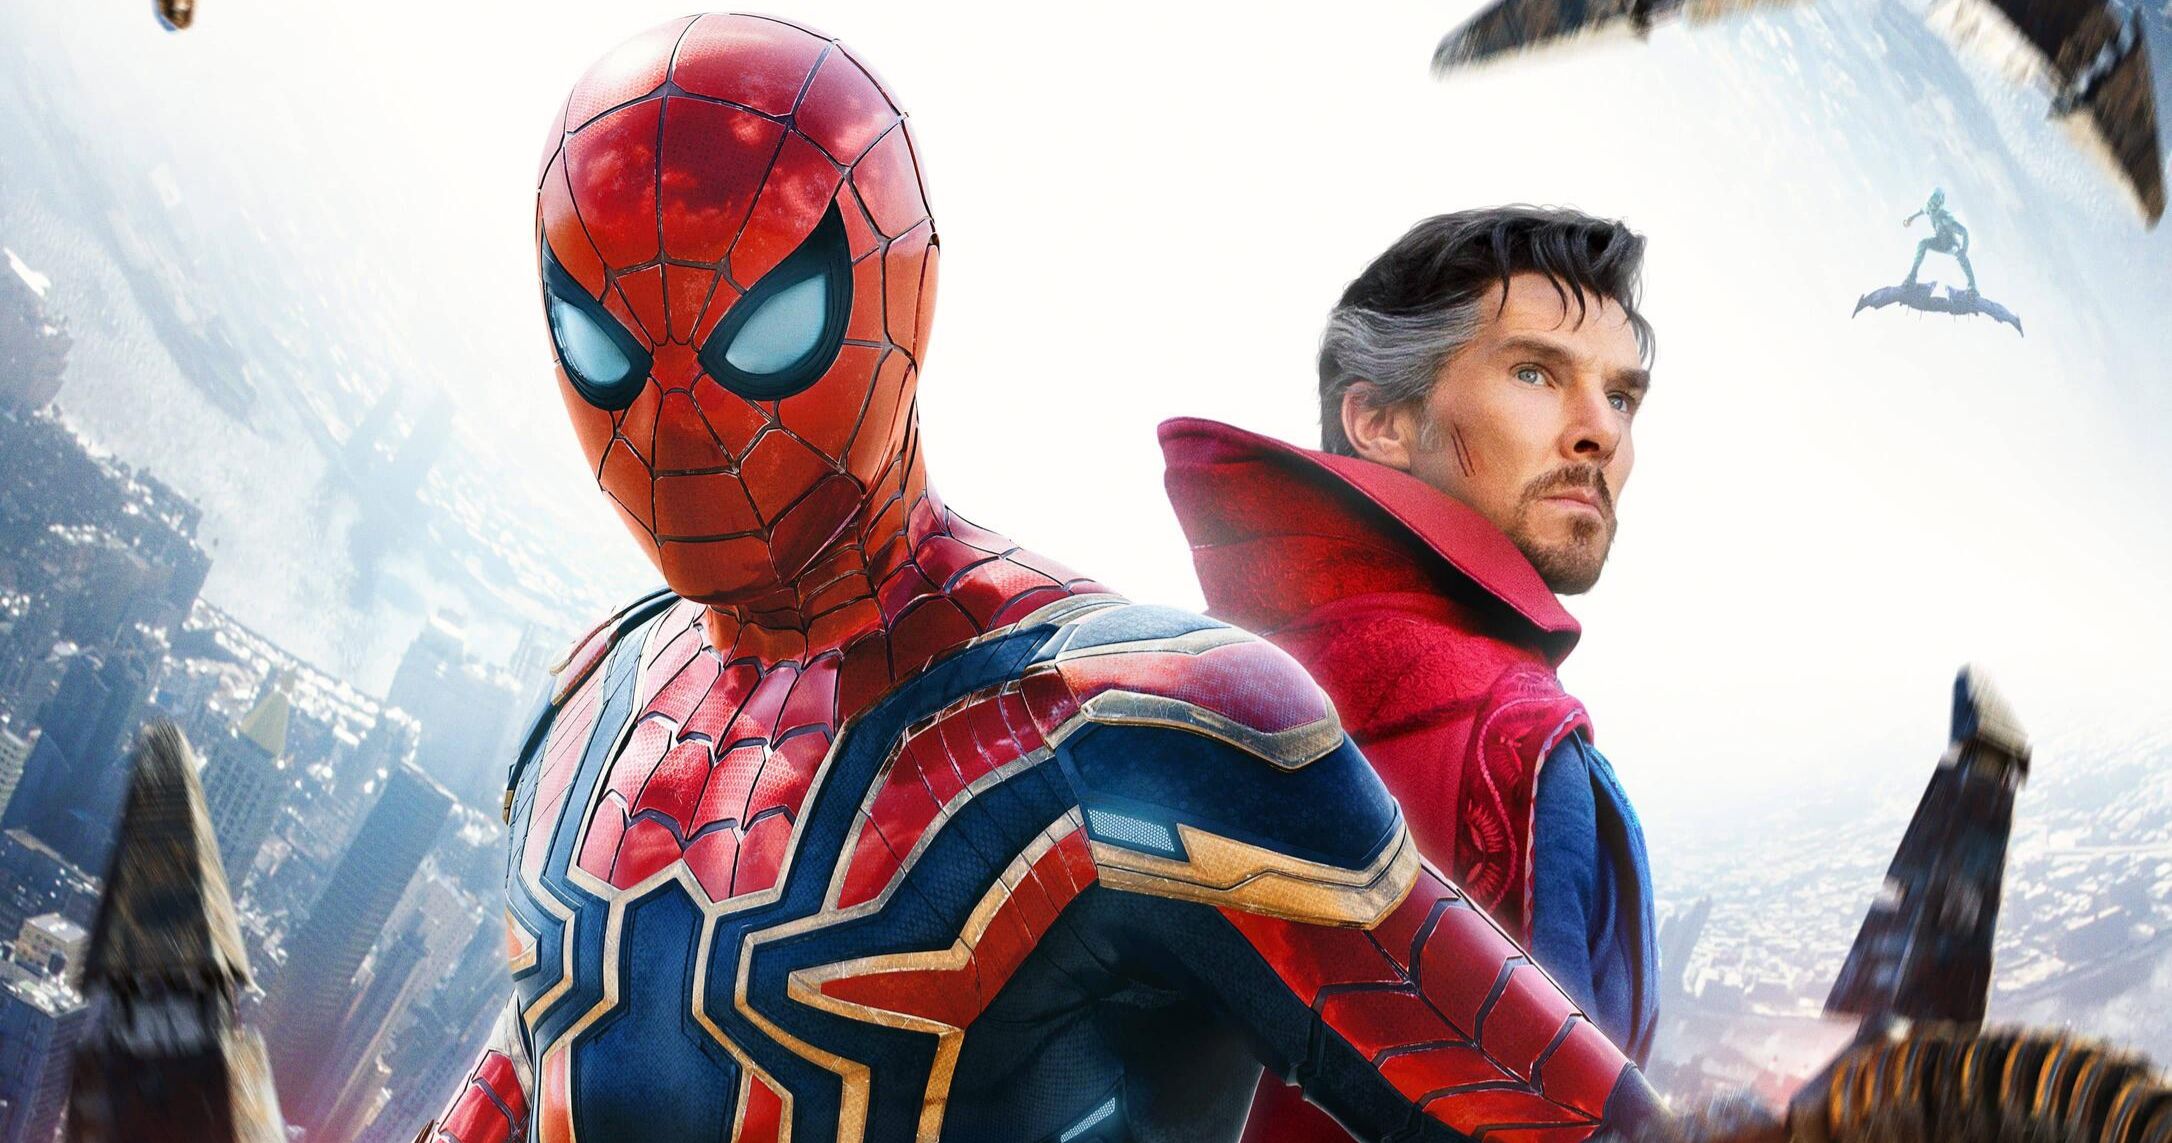 Spider-Man: No Way Home Was Constantly Being Rewritten While Filming